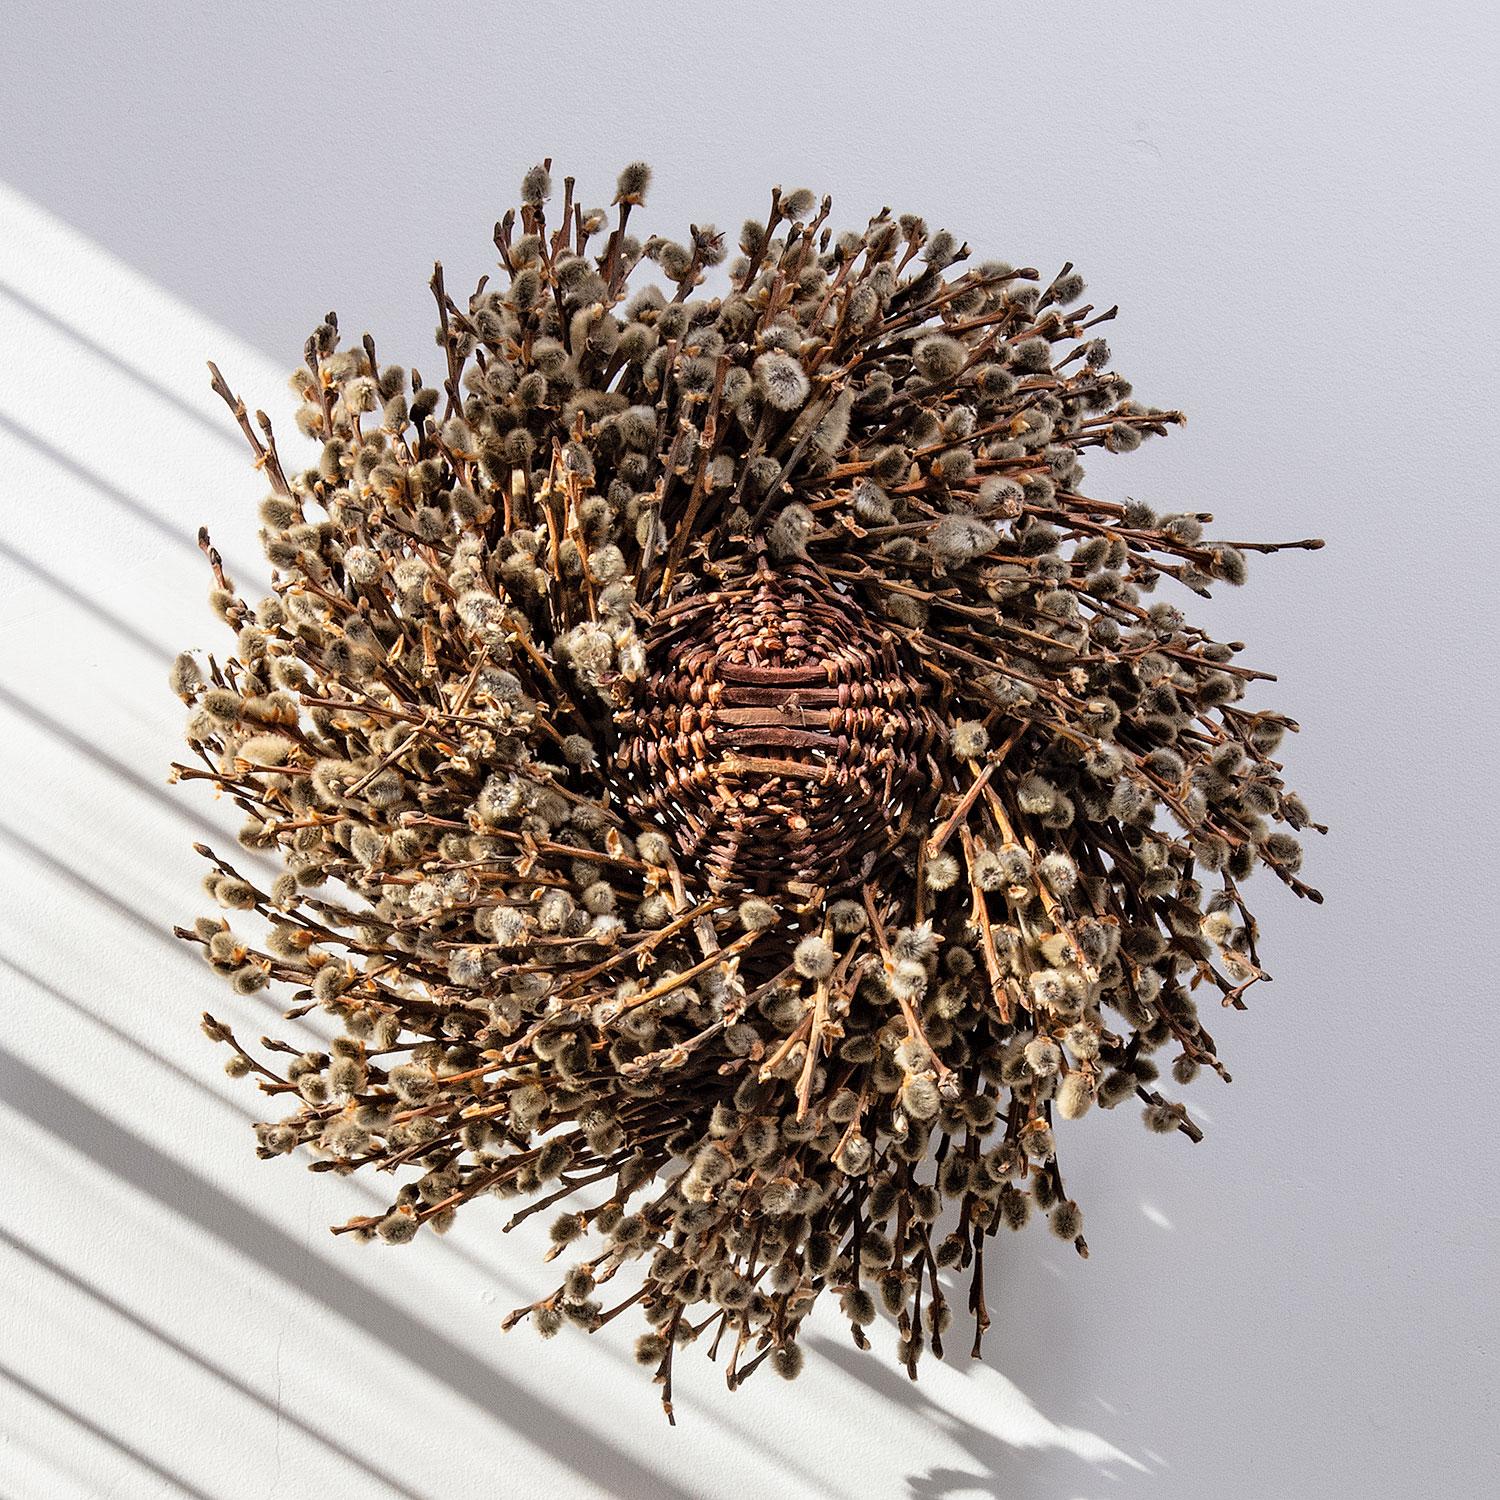 Kosonen's Pussy Willow X can be displayed on a surface as a vessel, or be mounted as a wall sculpture.

Wood was integral to the artistic practice of the late Markku Kosonen of Finland. An important aspect of his work was the ability to express